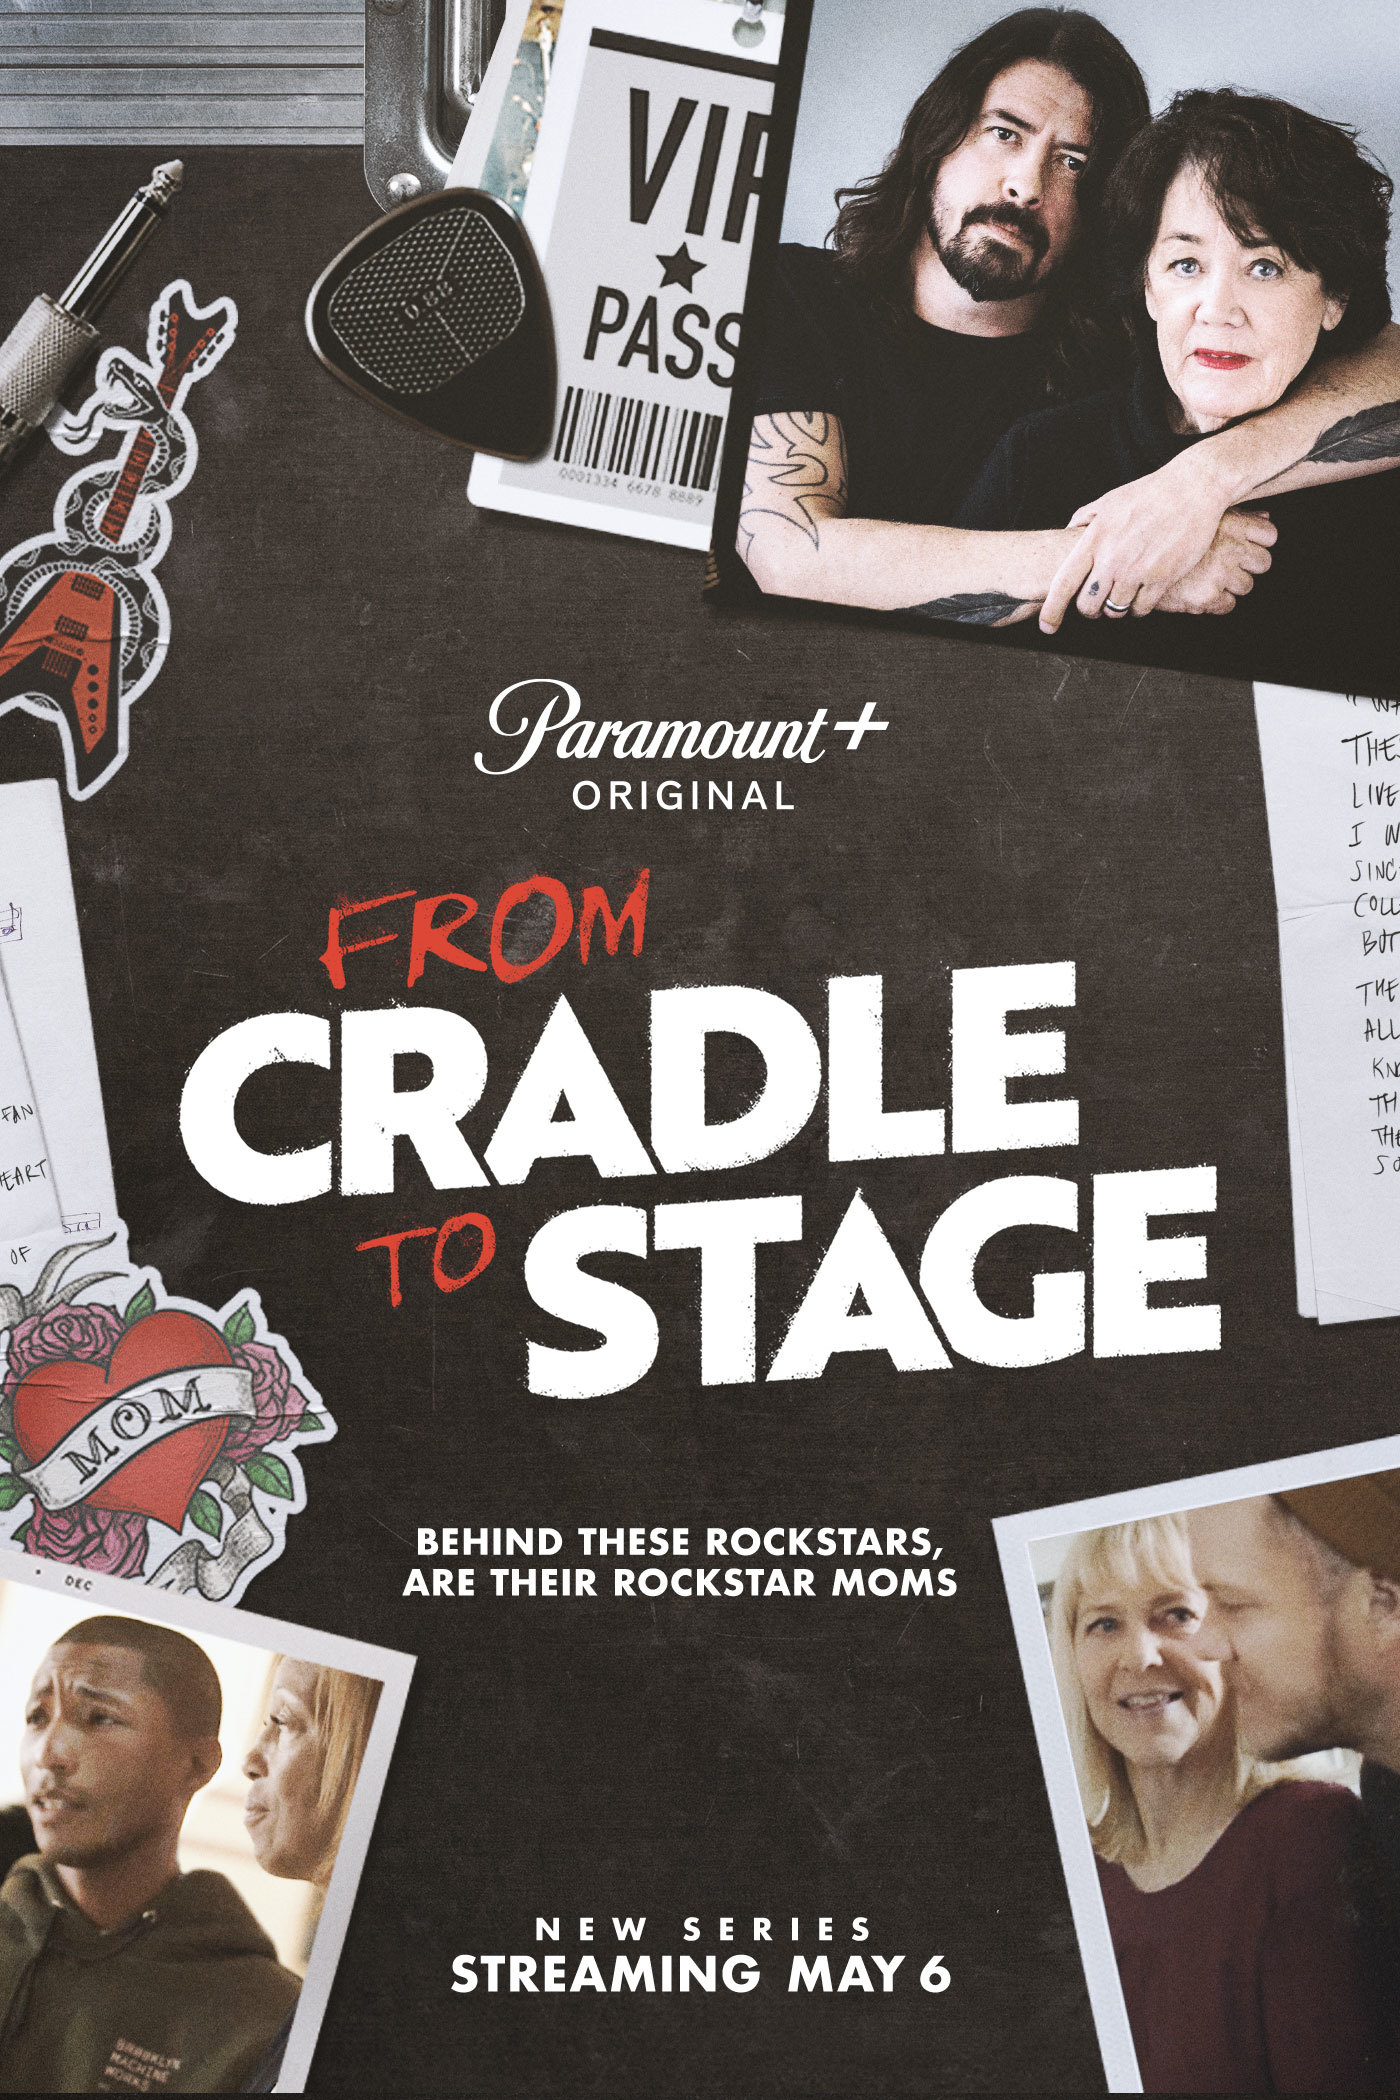 From Cradle to Stage on Paramount+